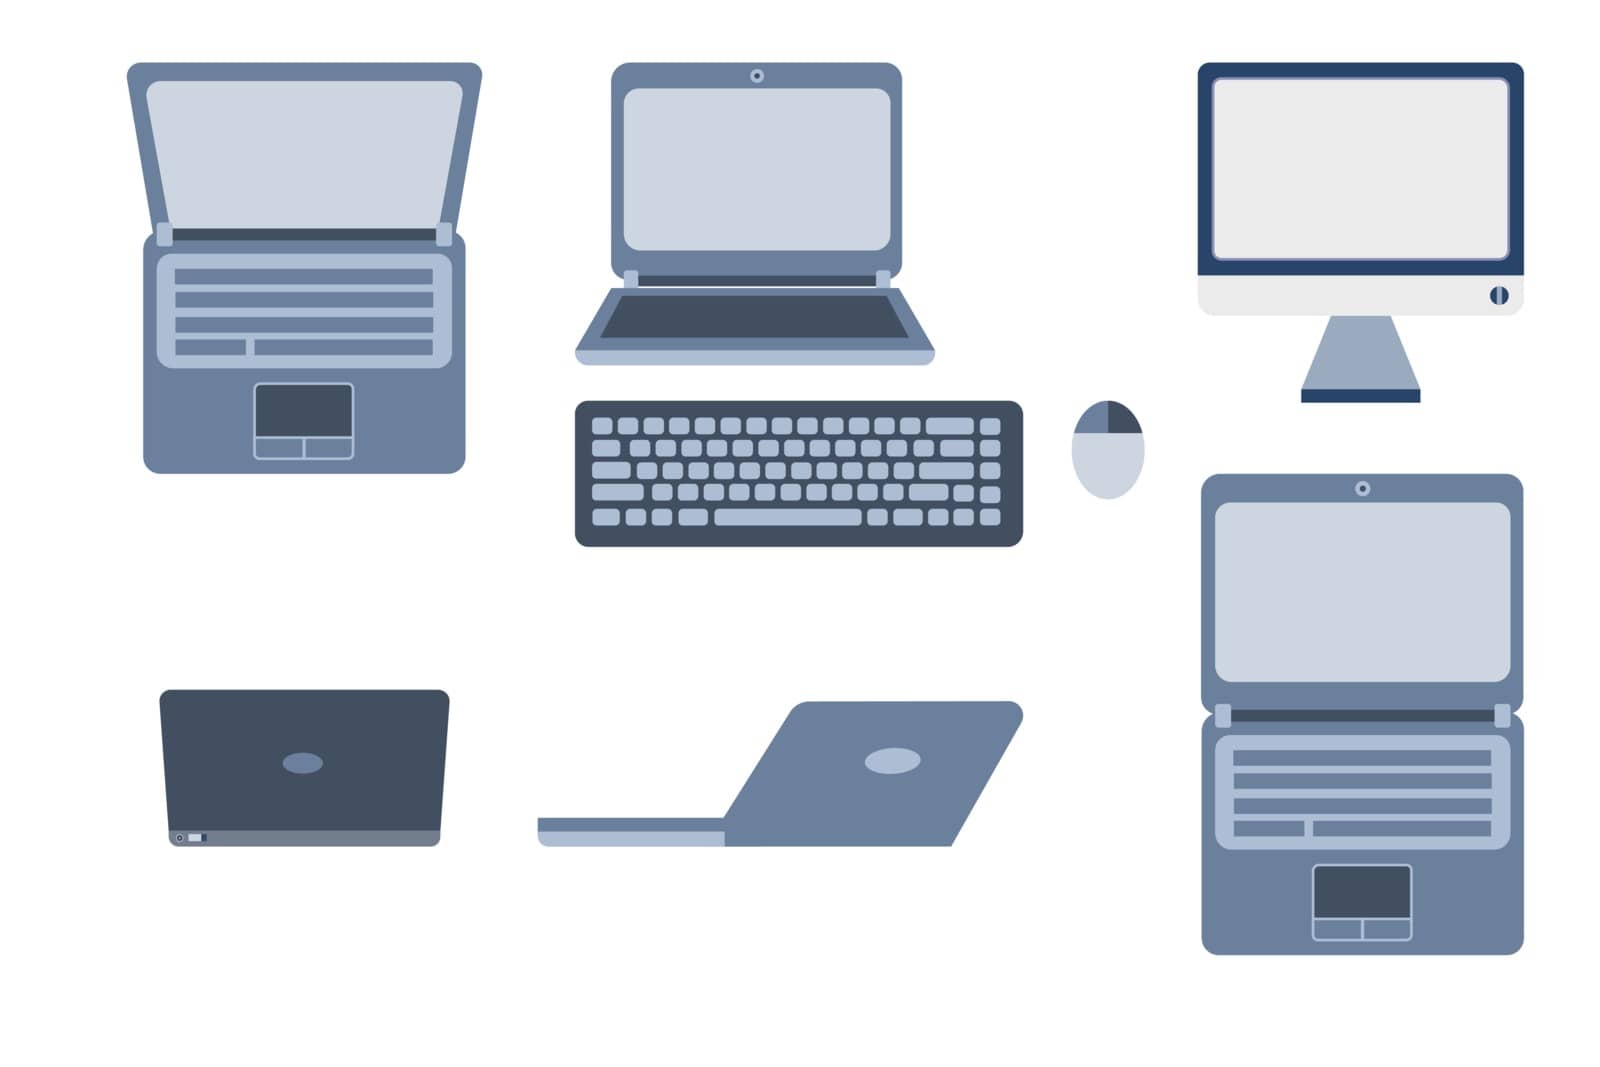 Personal computer, mouse, keyboard, Laptop. Vector design illustration in flat style.